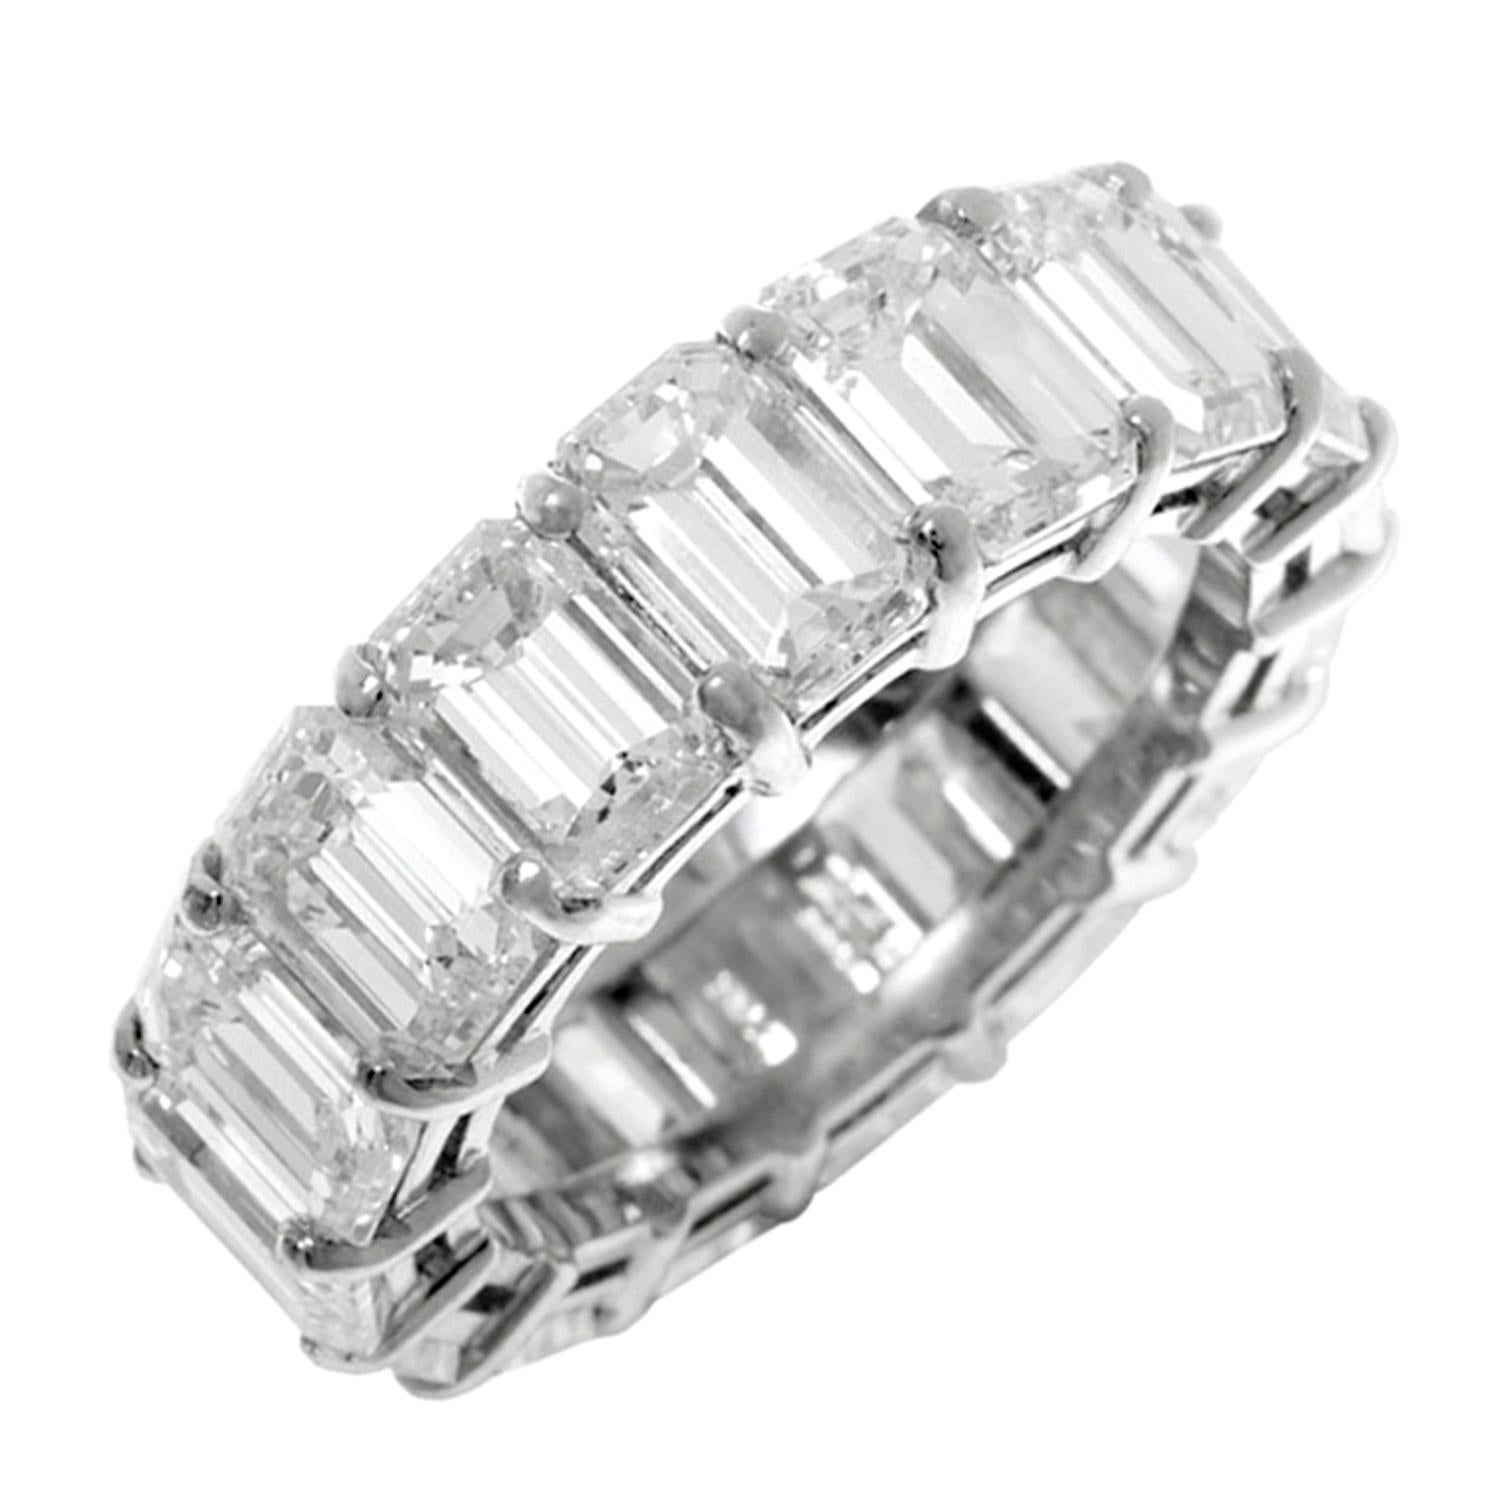 Emerald Cut Diana M. PLATINUM ETERNITY DIAMOND WEDDING BAND GIA CERTIFIED WITH 14.10CT  For Sale